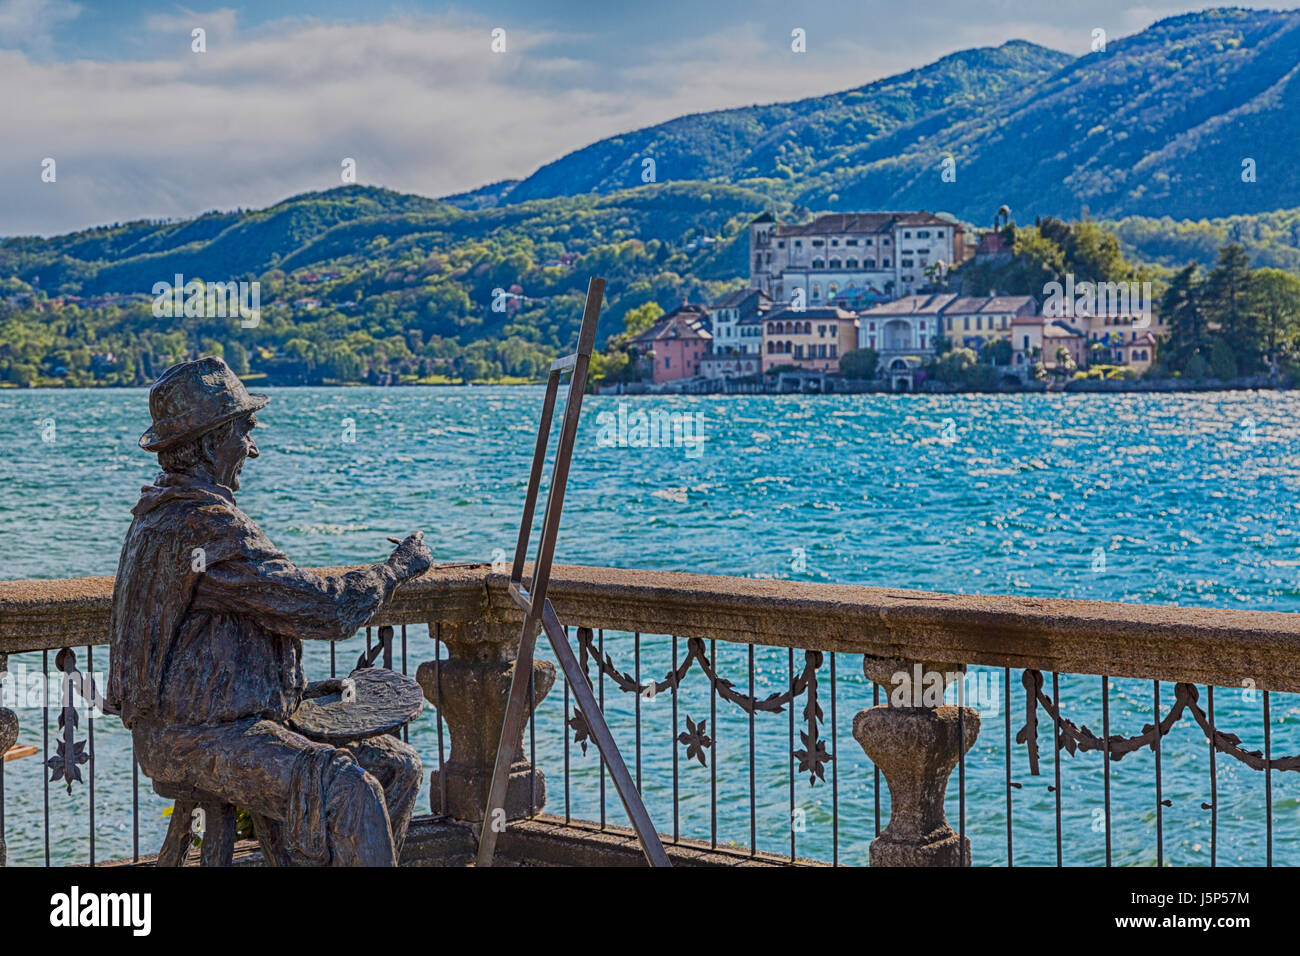 statue of artist painting at Orta San Giulio, Lake Orta, Italy in ...